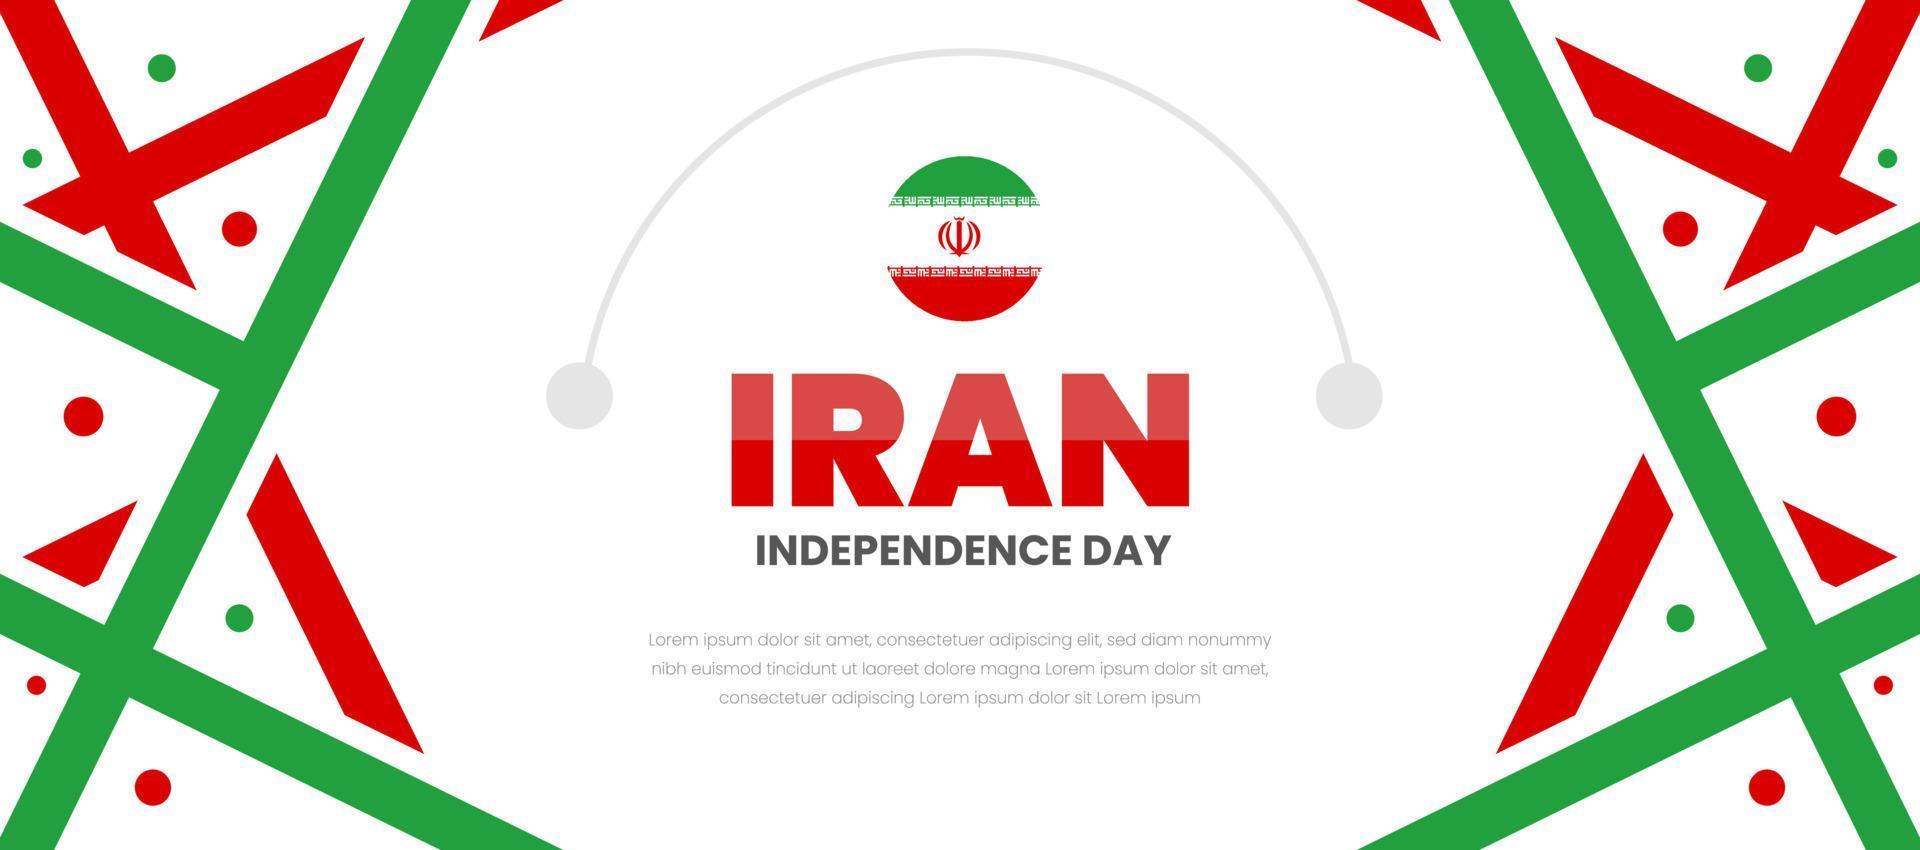 Happy Iran Independence Day Background. Islamic Republic Day 11 February Celebration Vector Design Illustration. Template for Poster, Banner, Advertising, Greeting Card, banner, Print Design Element.